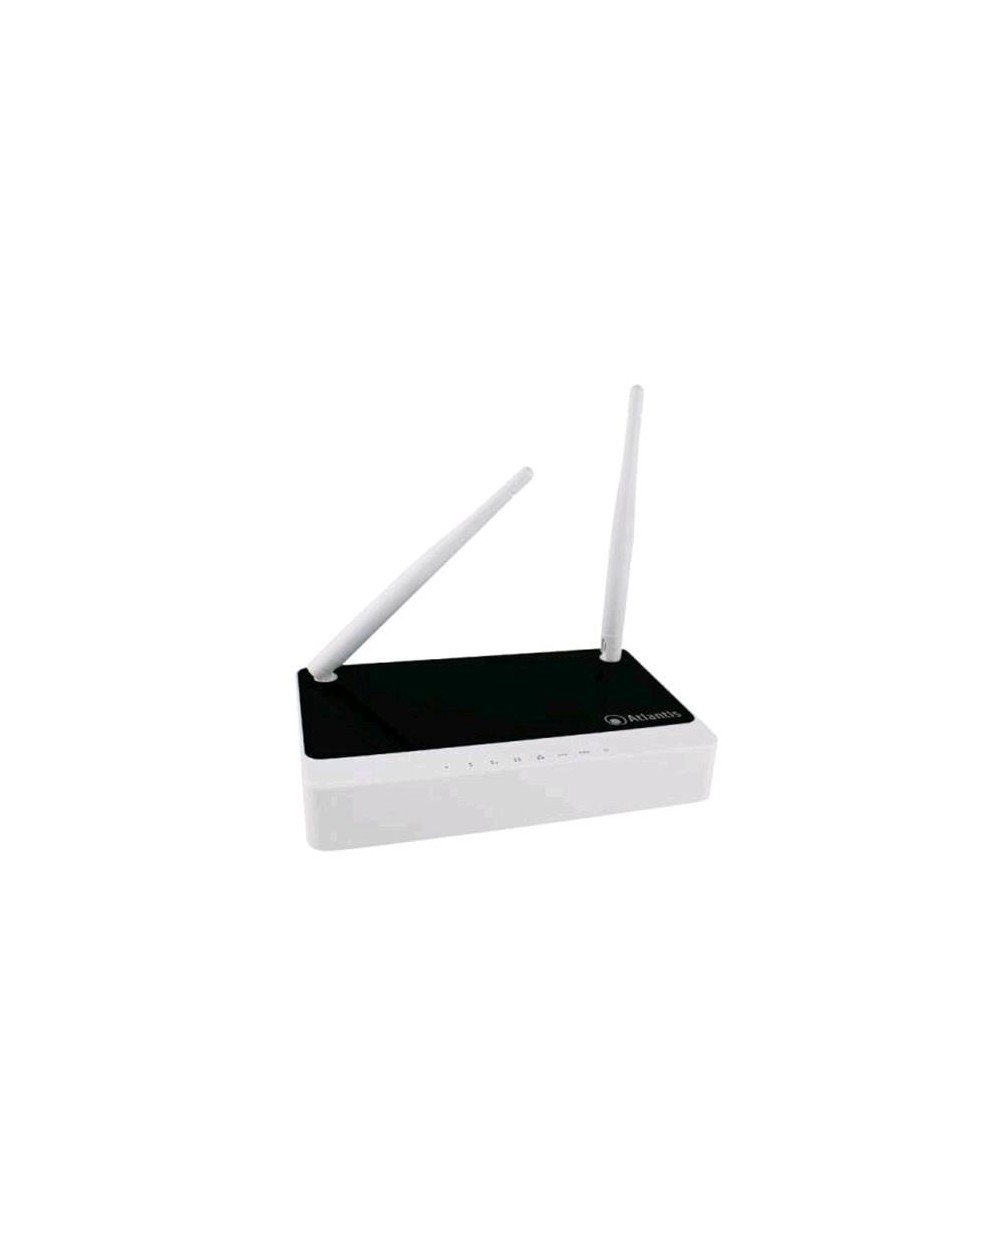 WebShare RB300 Wireless N Broadband Router A02-RB-W300N